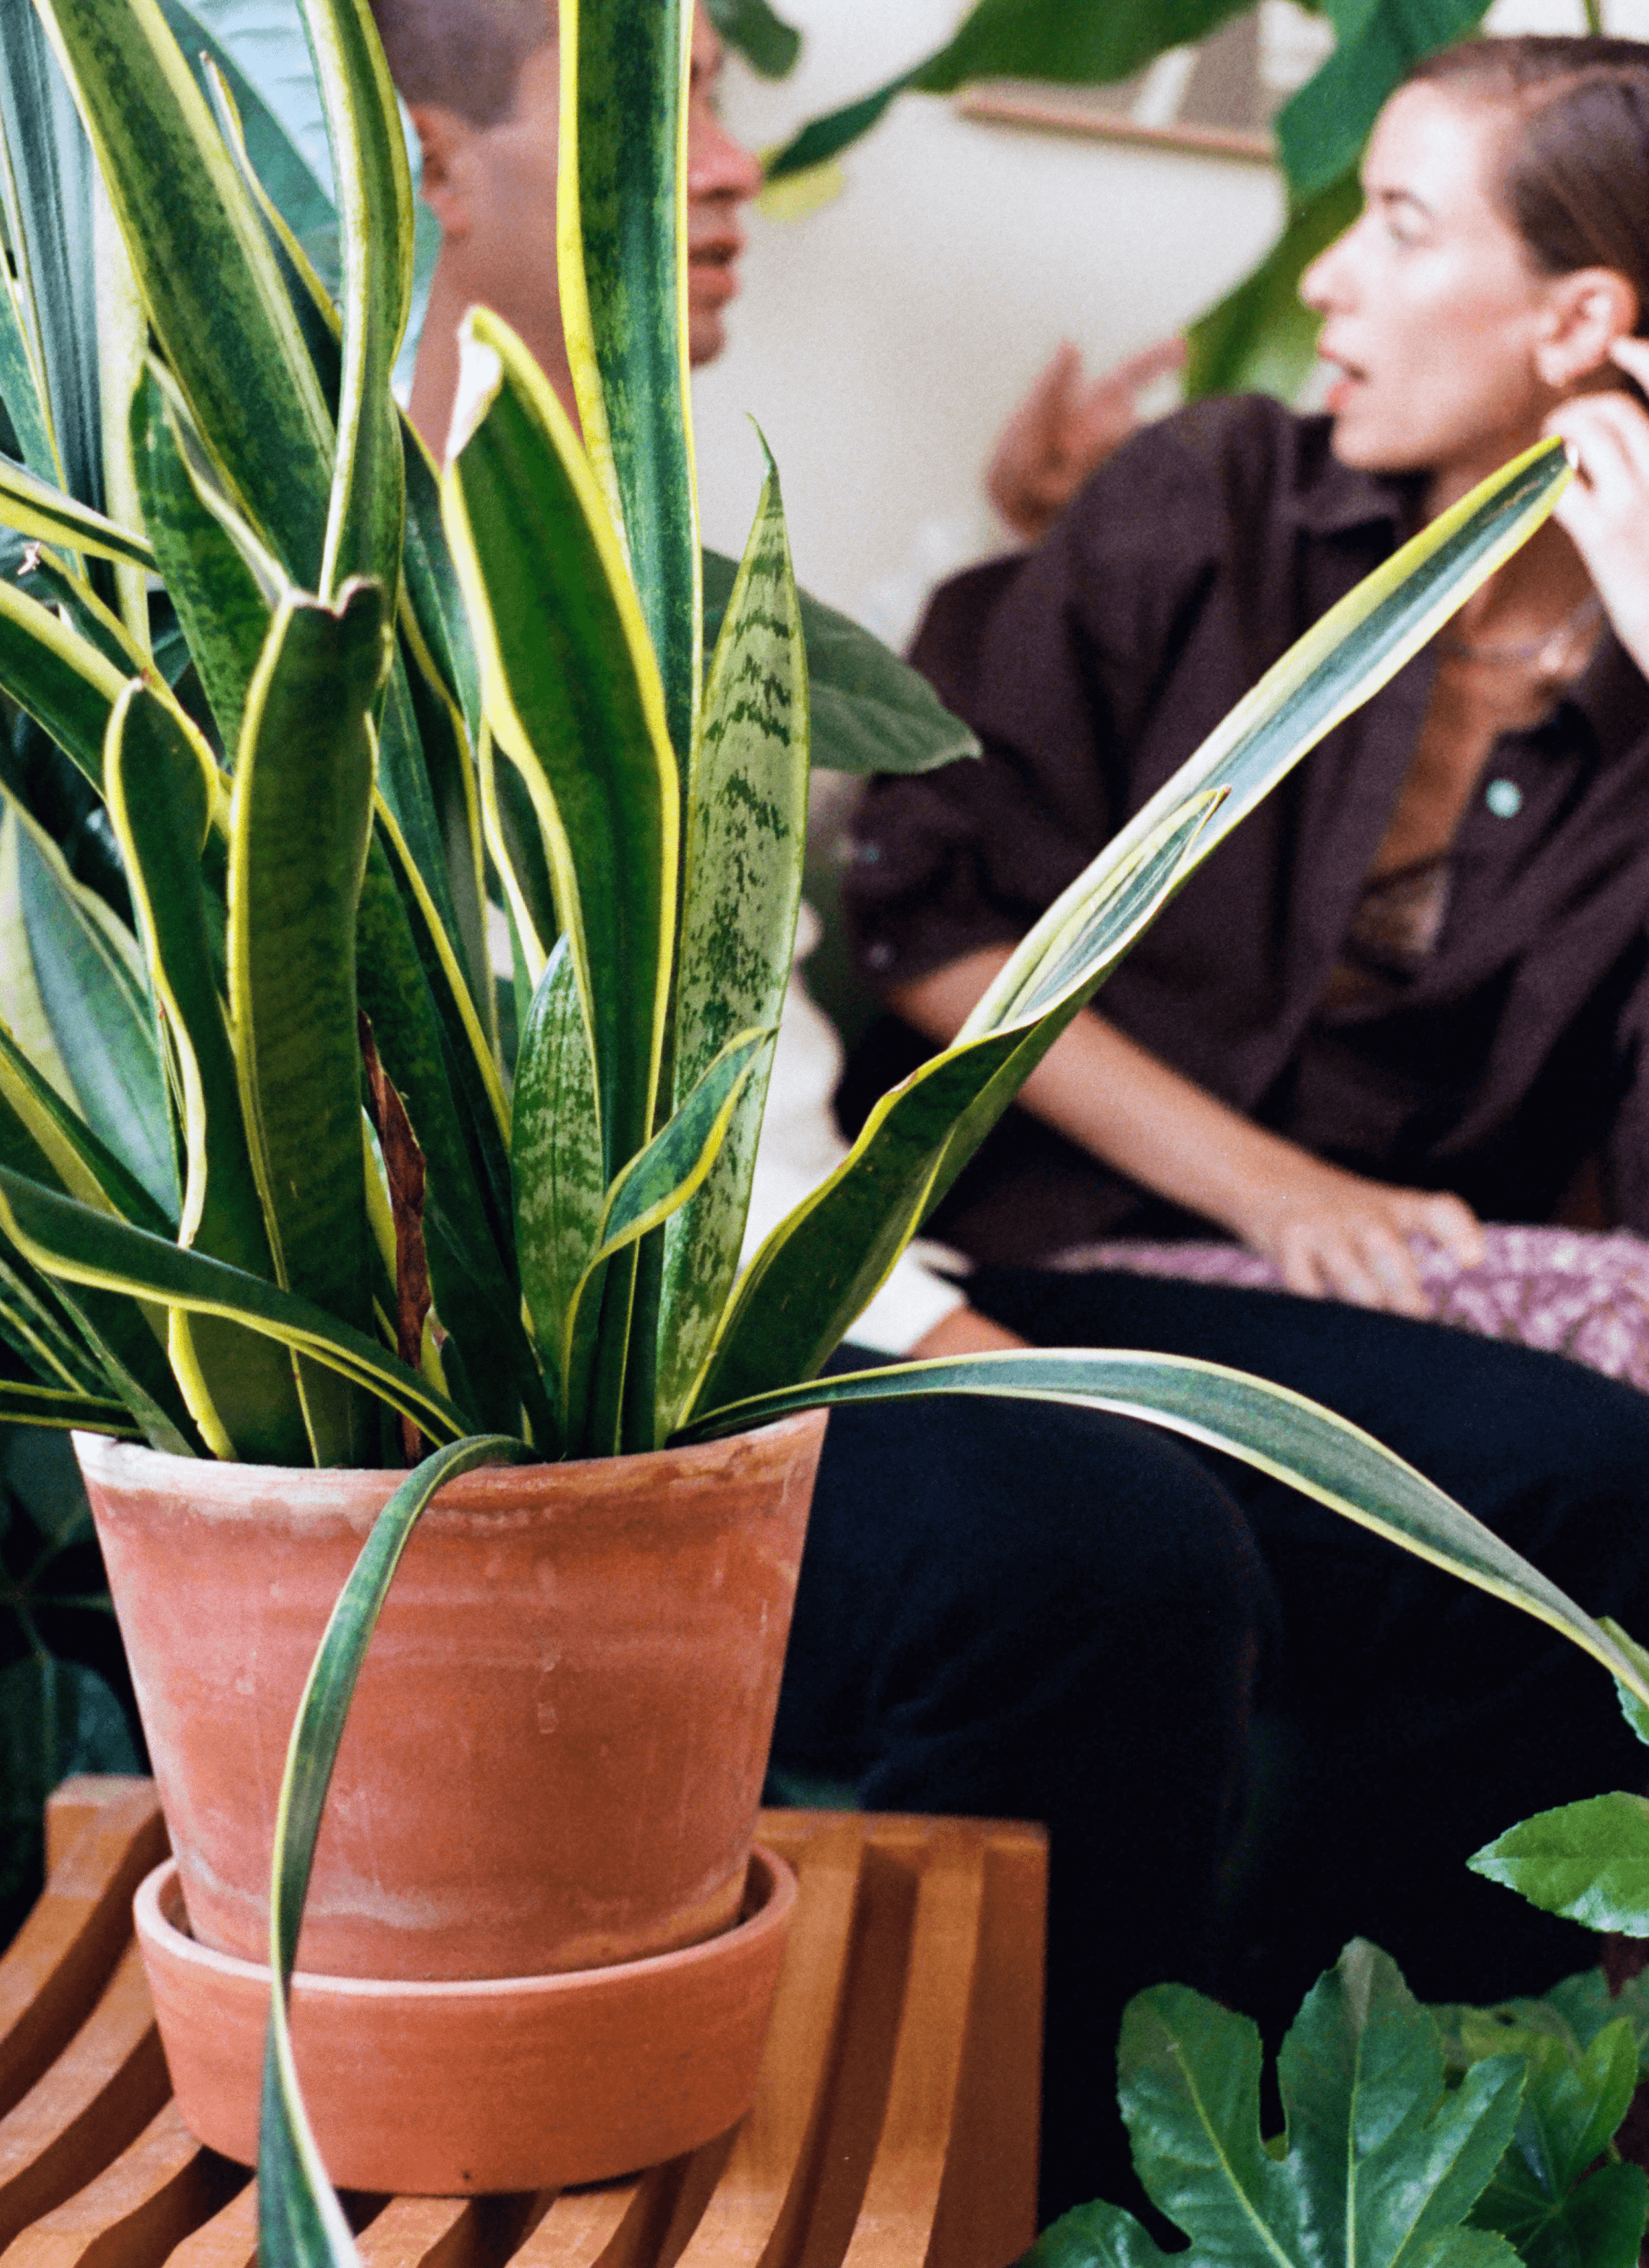 A snake plant is planted in a terracotta pot and the couple are behind the background.